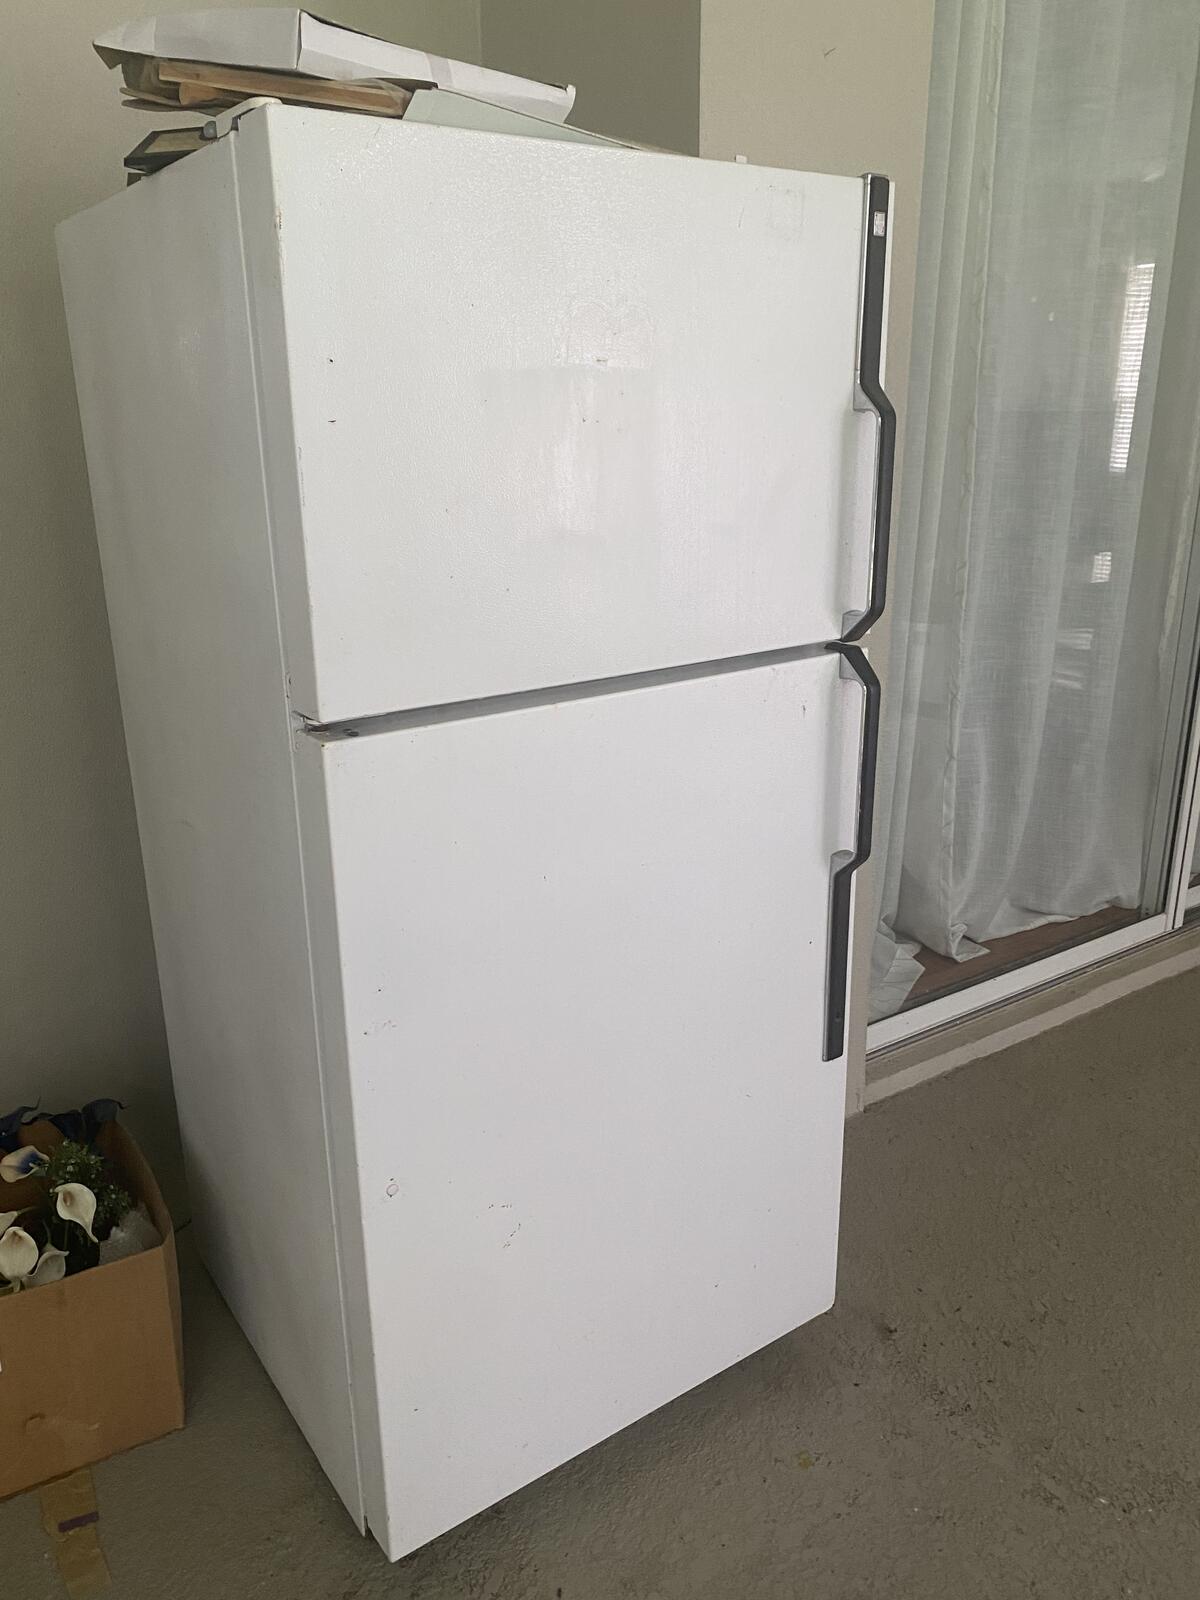 how-much-to-haul-2-refrigerators-away-to-the-dump-hunters-green